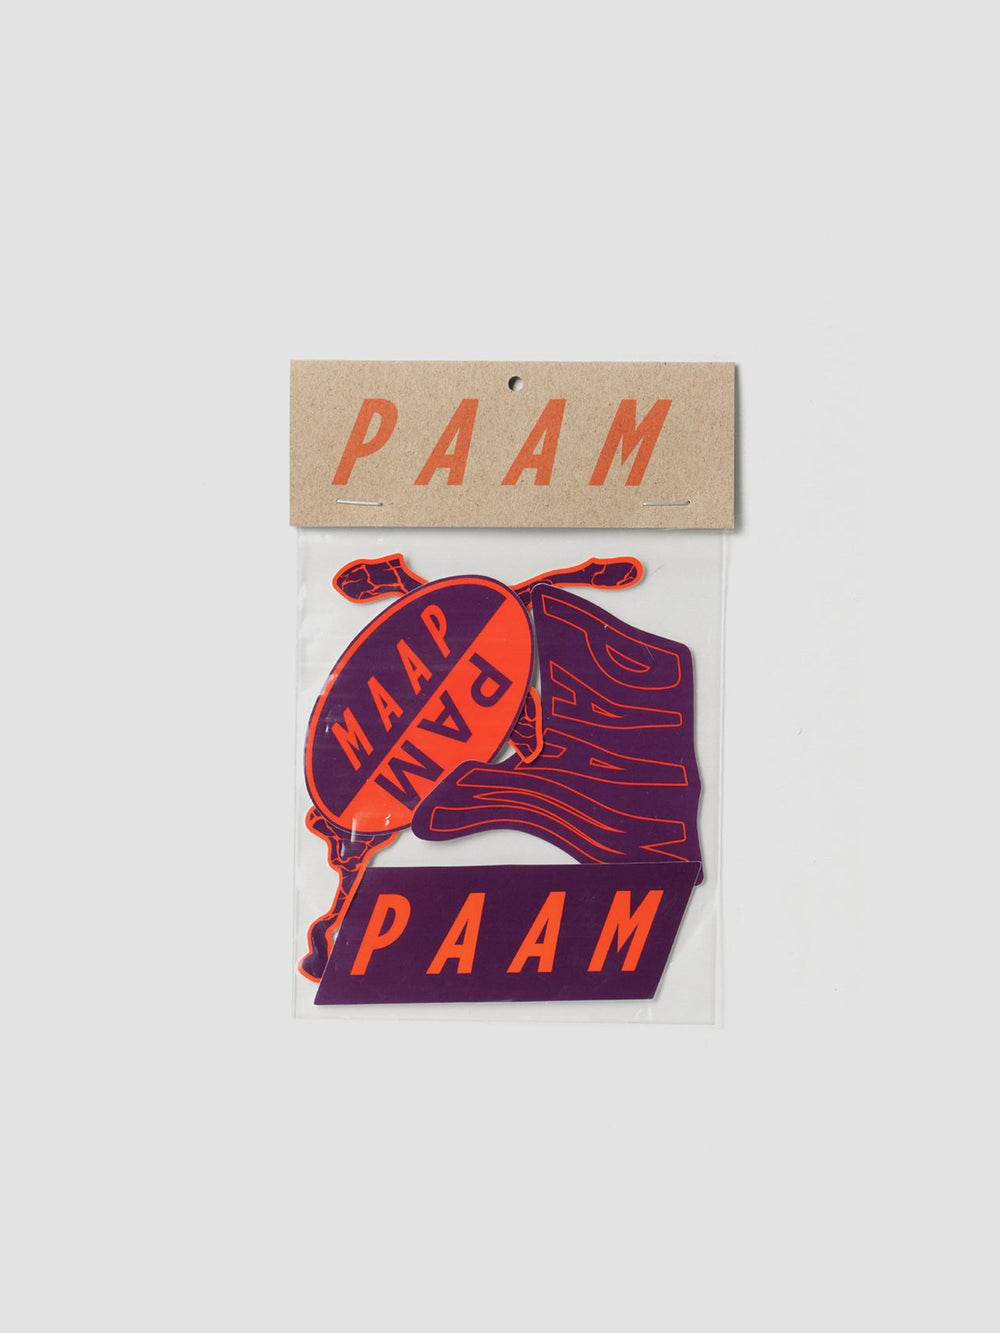 Product Image for MAAP X PAM Sticker Pack